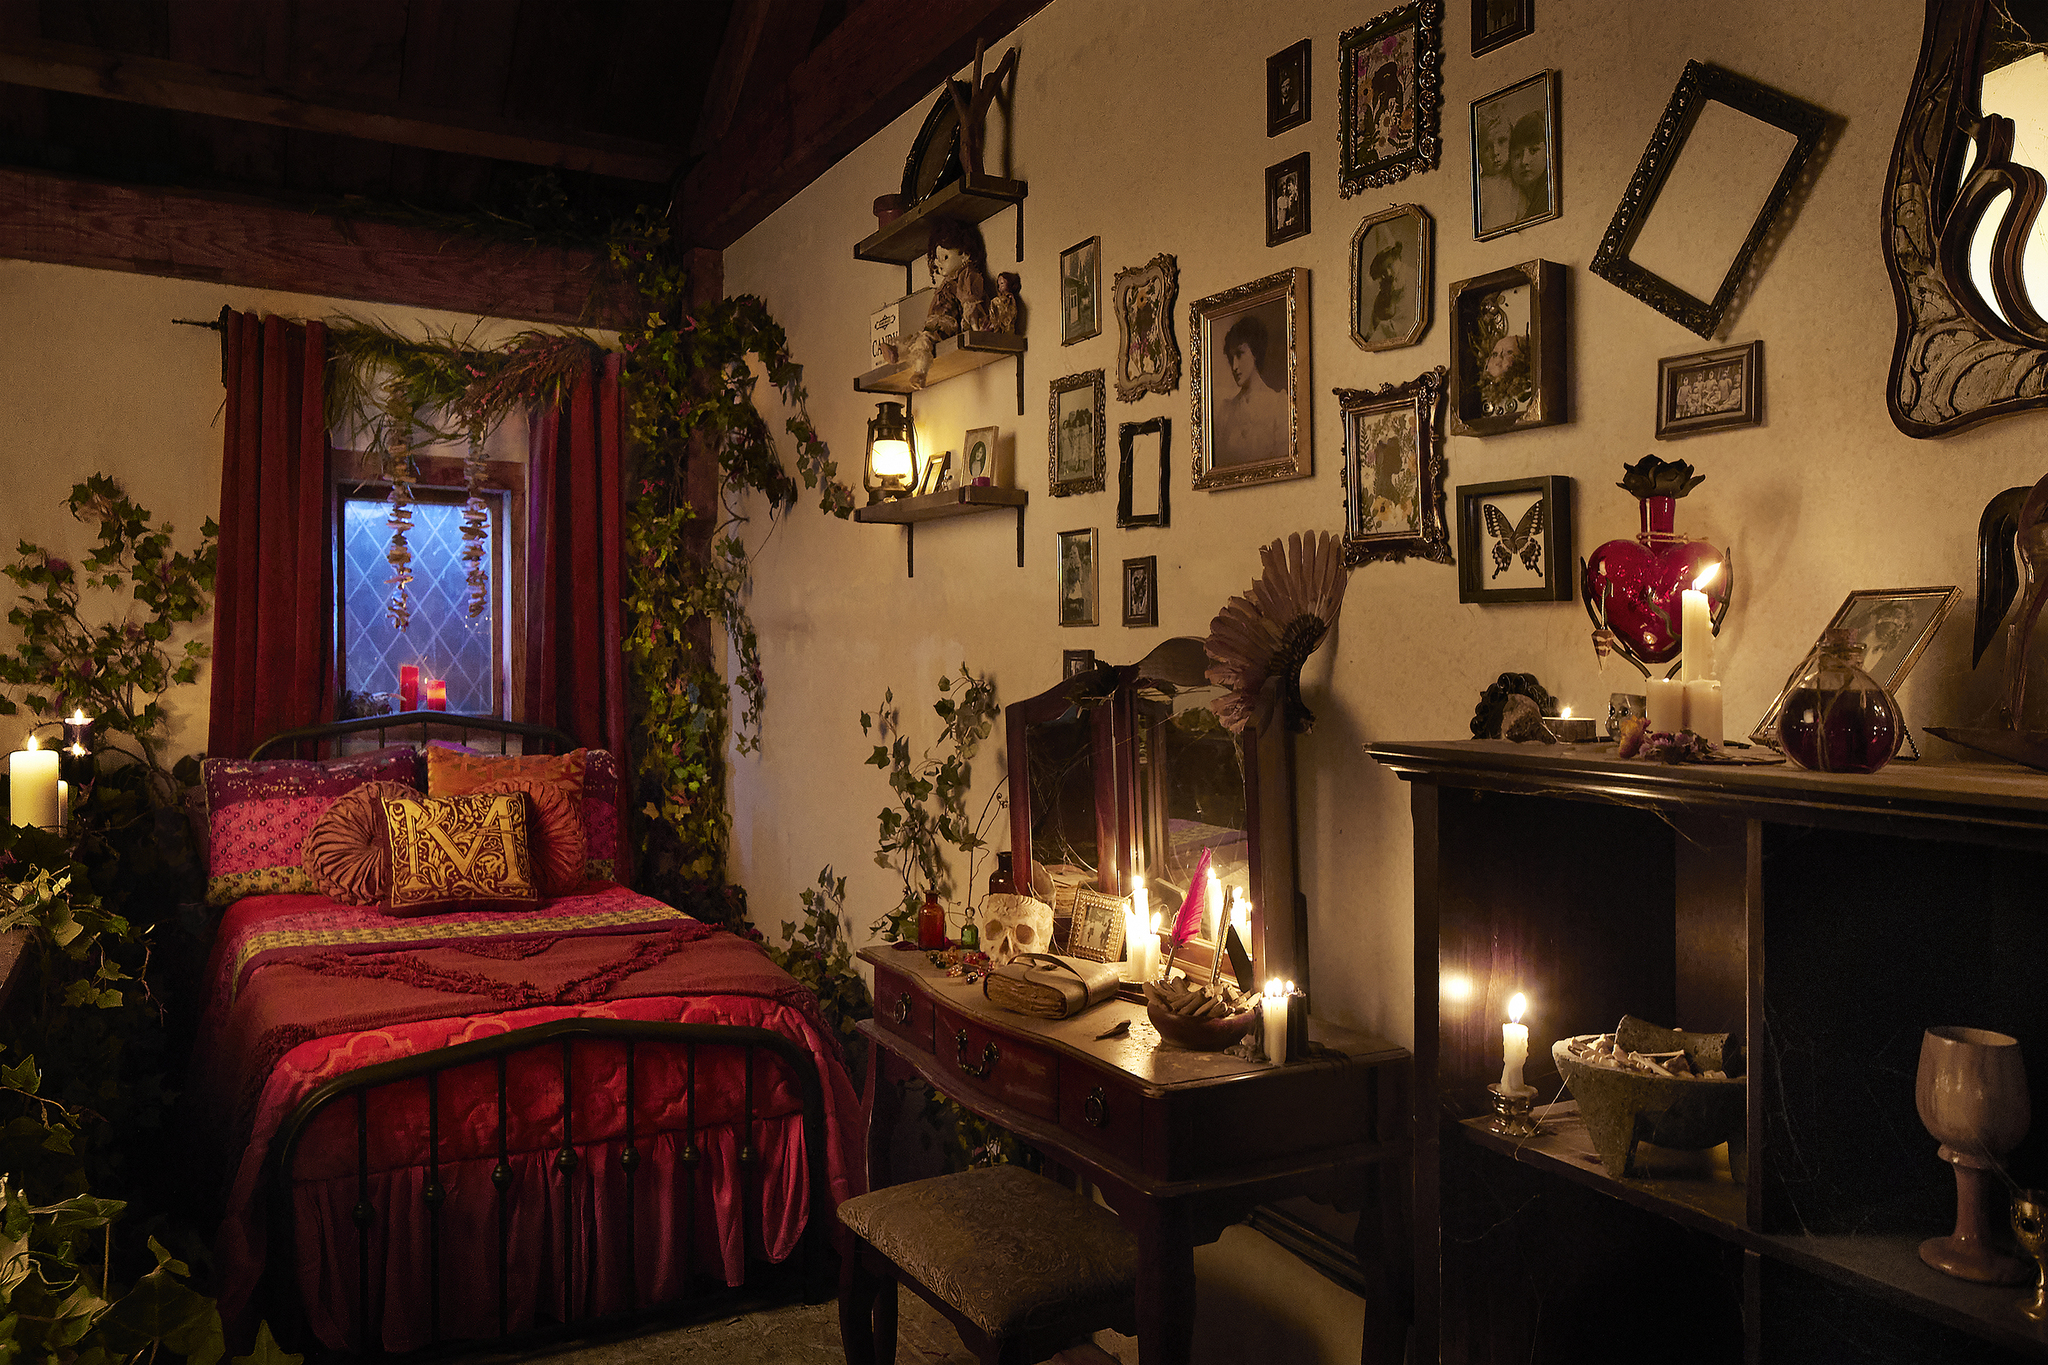 Airbnb Offering Limited-Time Sanderson Sisters Cottage Stay for 'Hocus Pocus' Fans